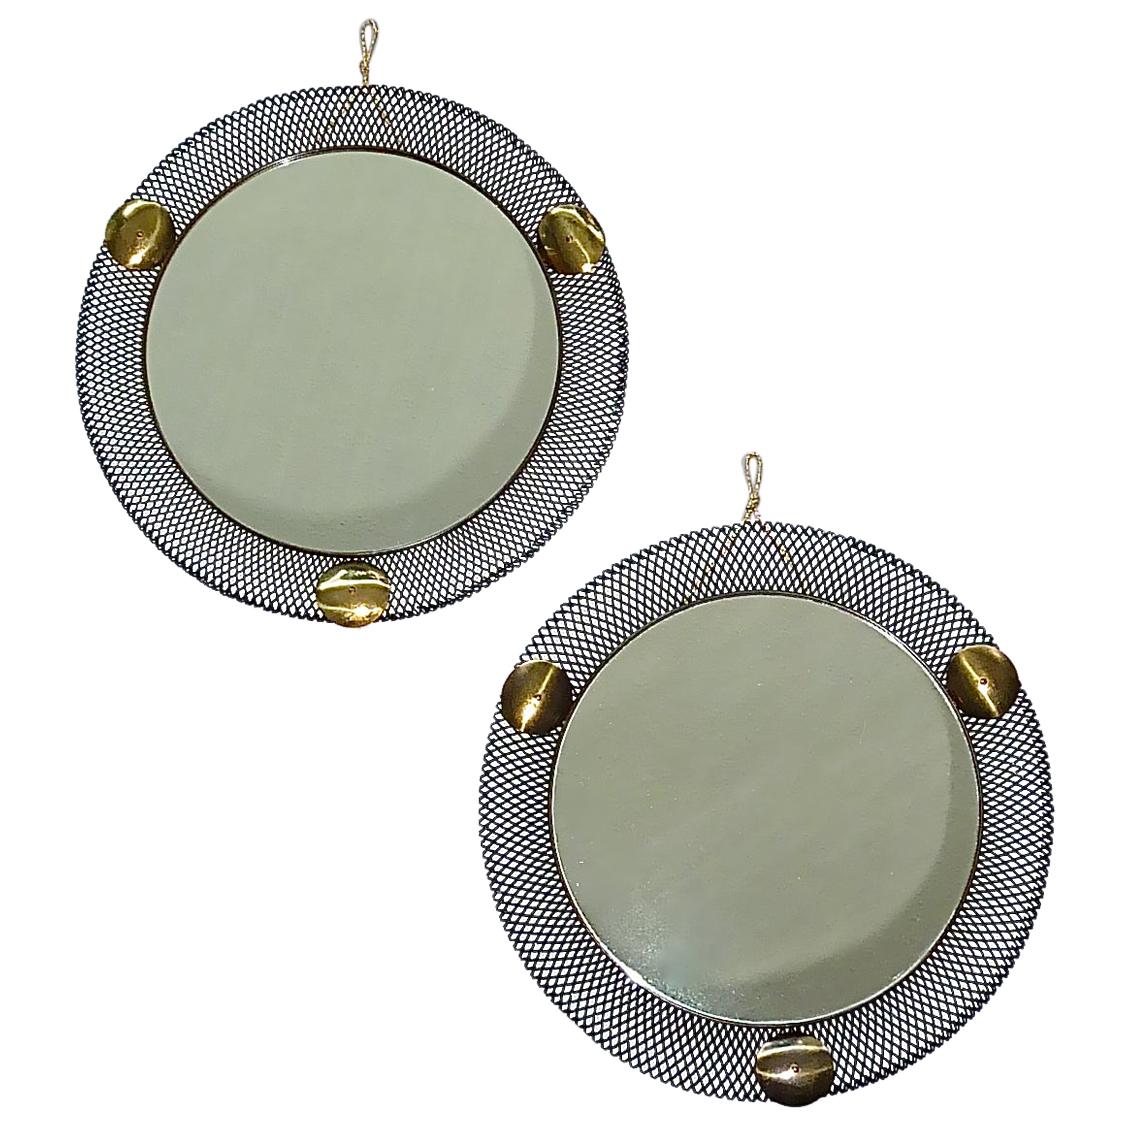 Pair Round Midcentury Wall Mirrors Brass Black Stretched Metal 1955 Mategot Biny For Sale